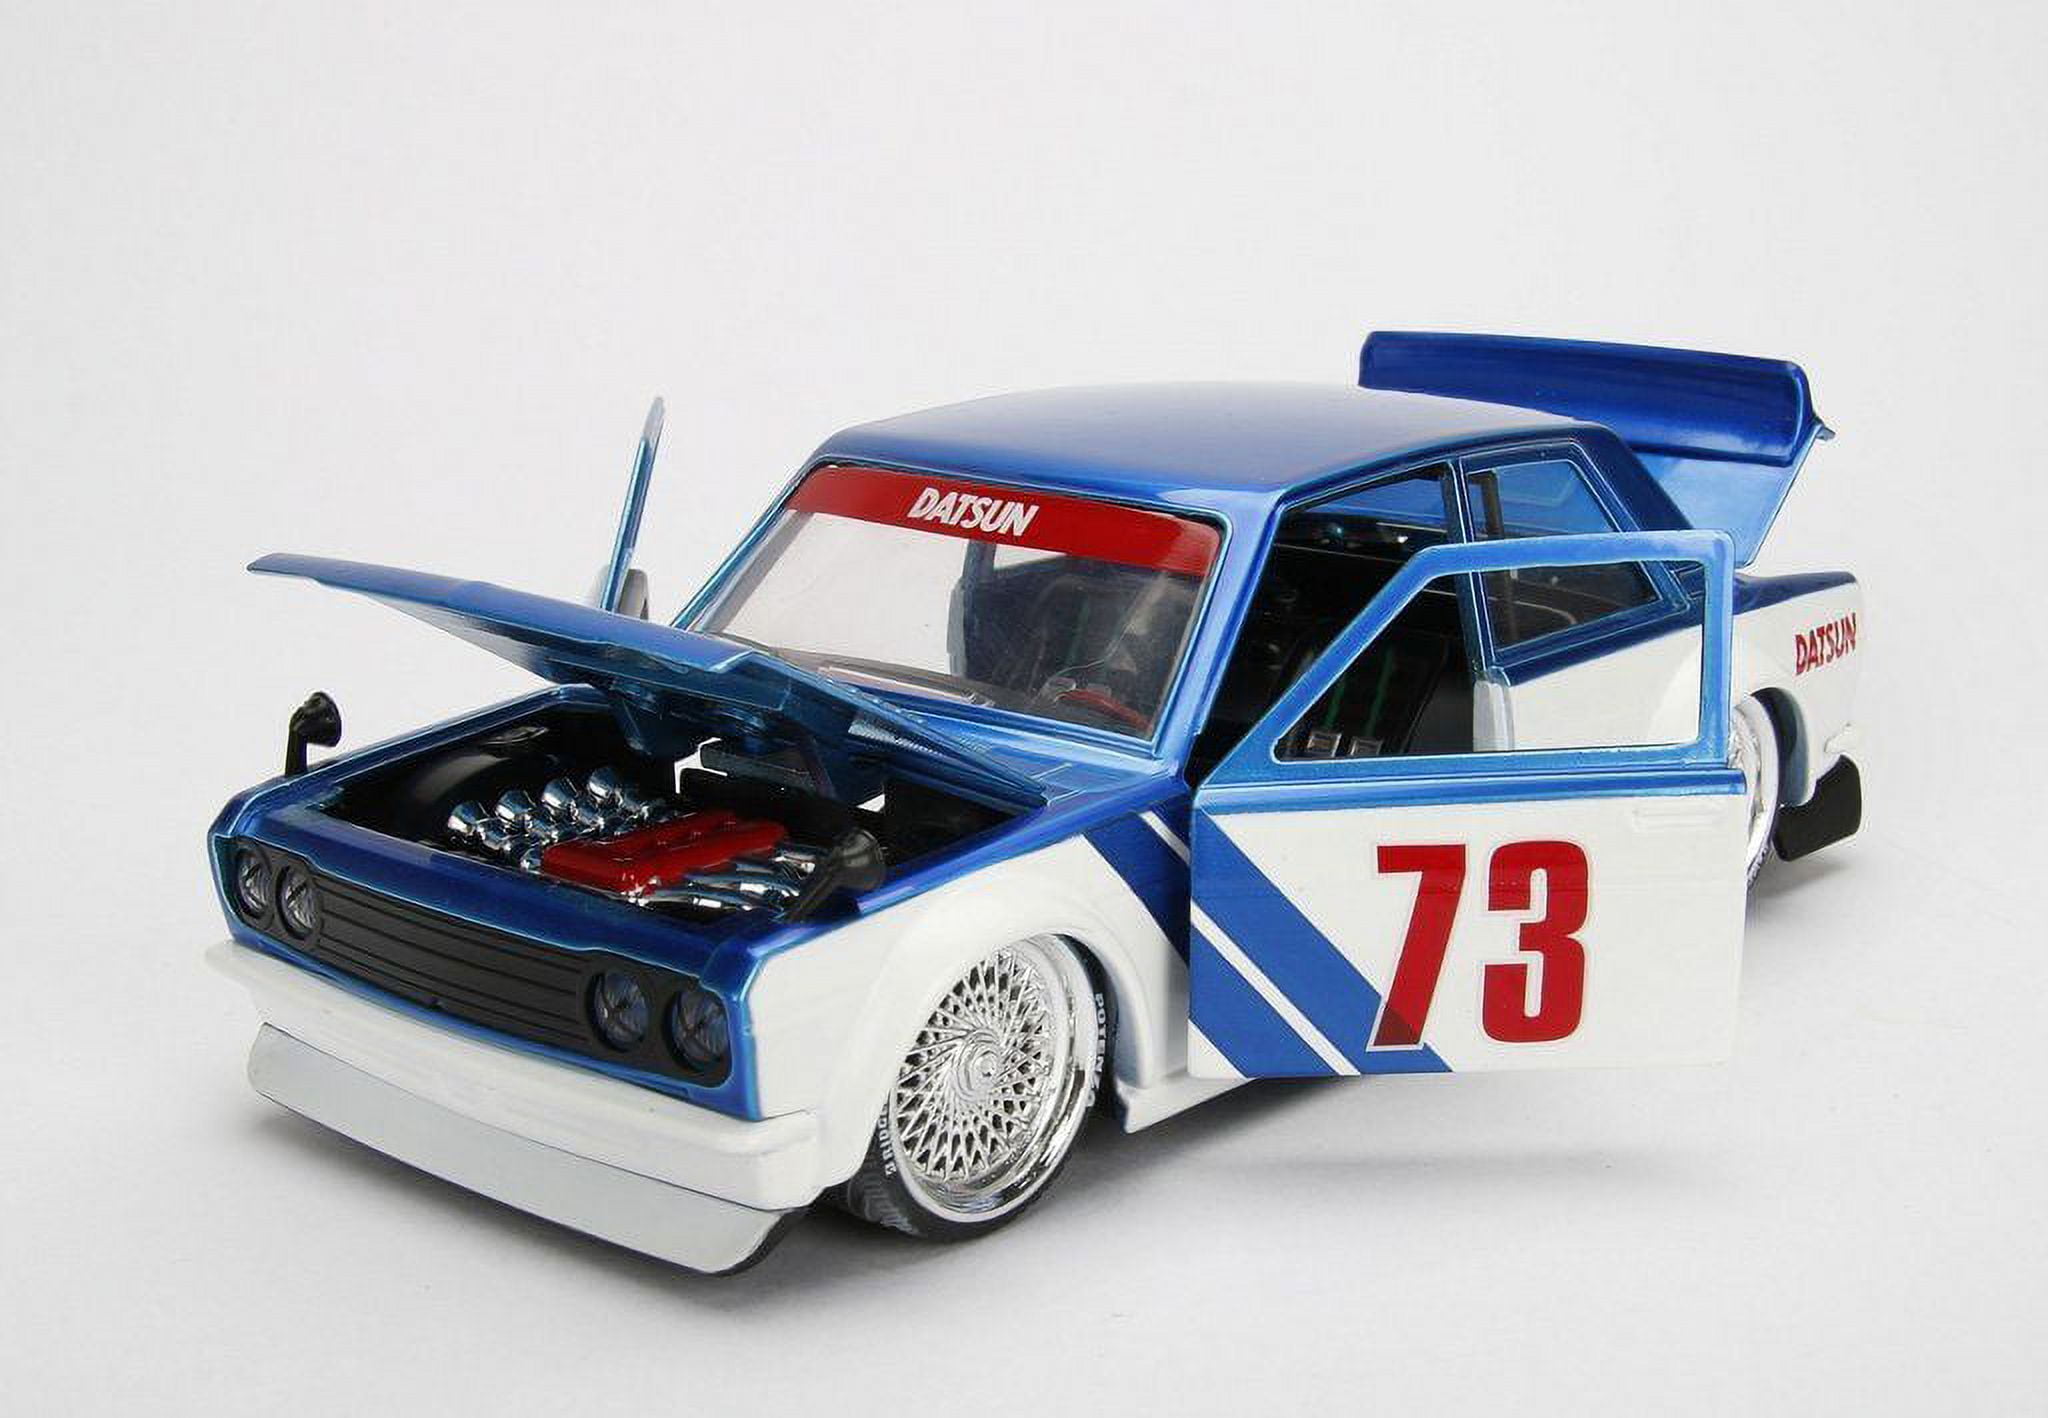 1973 Datsun 510 Widebody #73 Candy Blue and White 